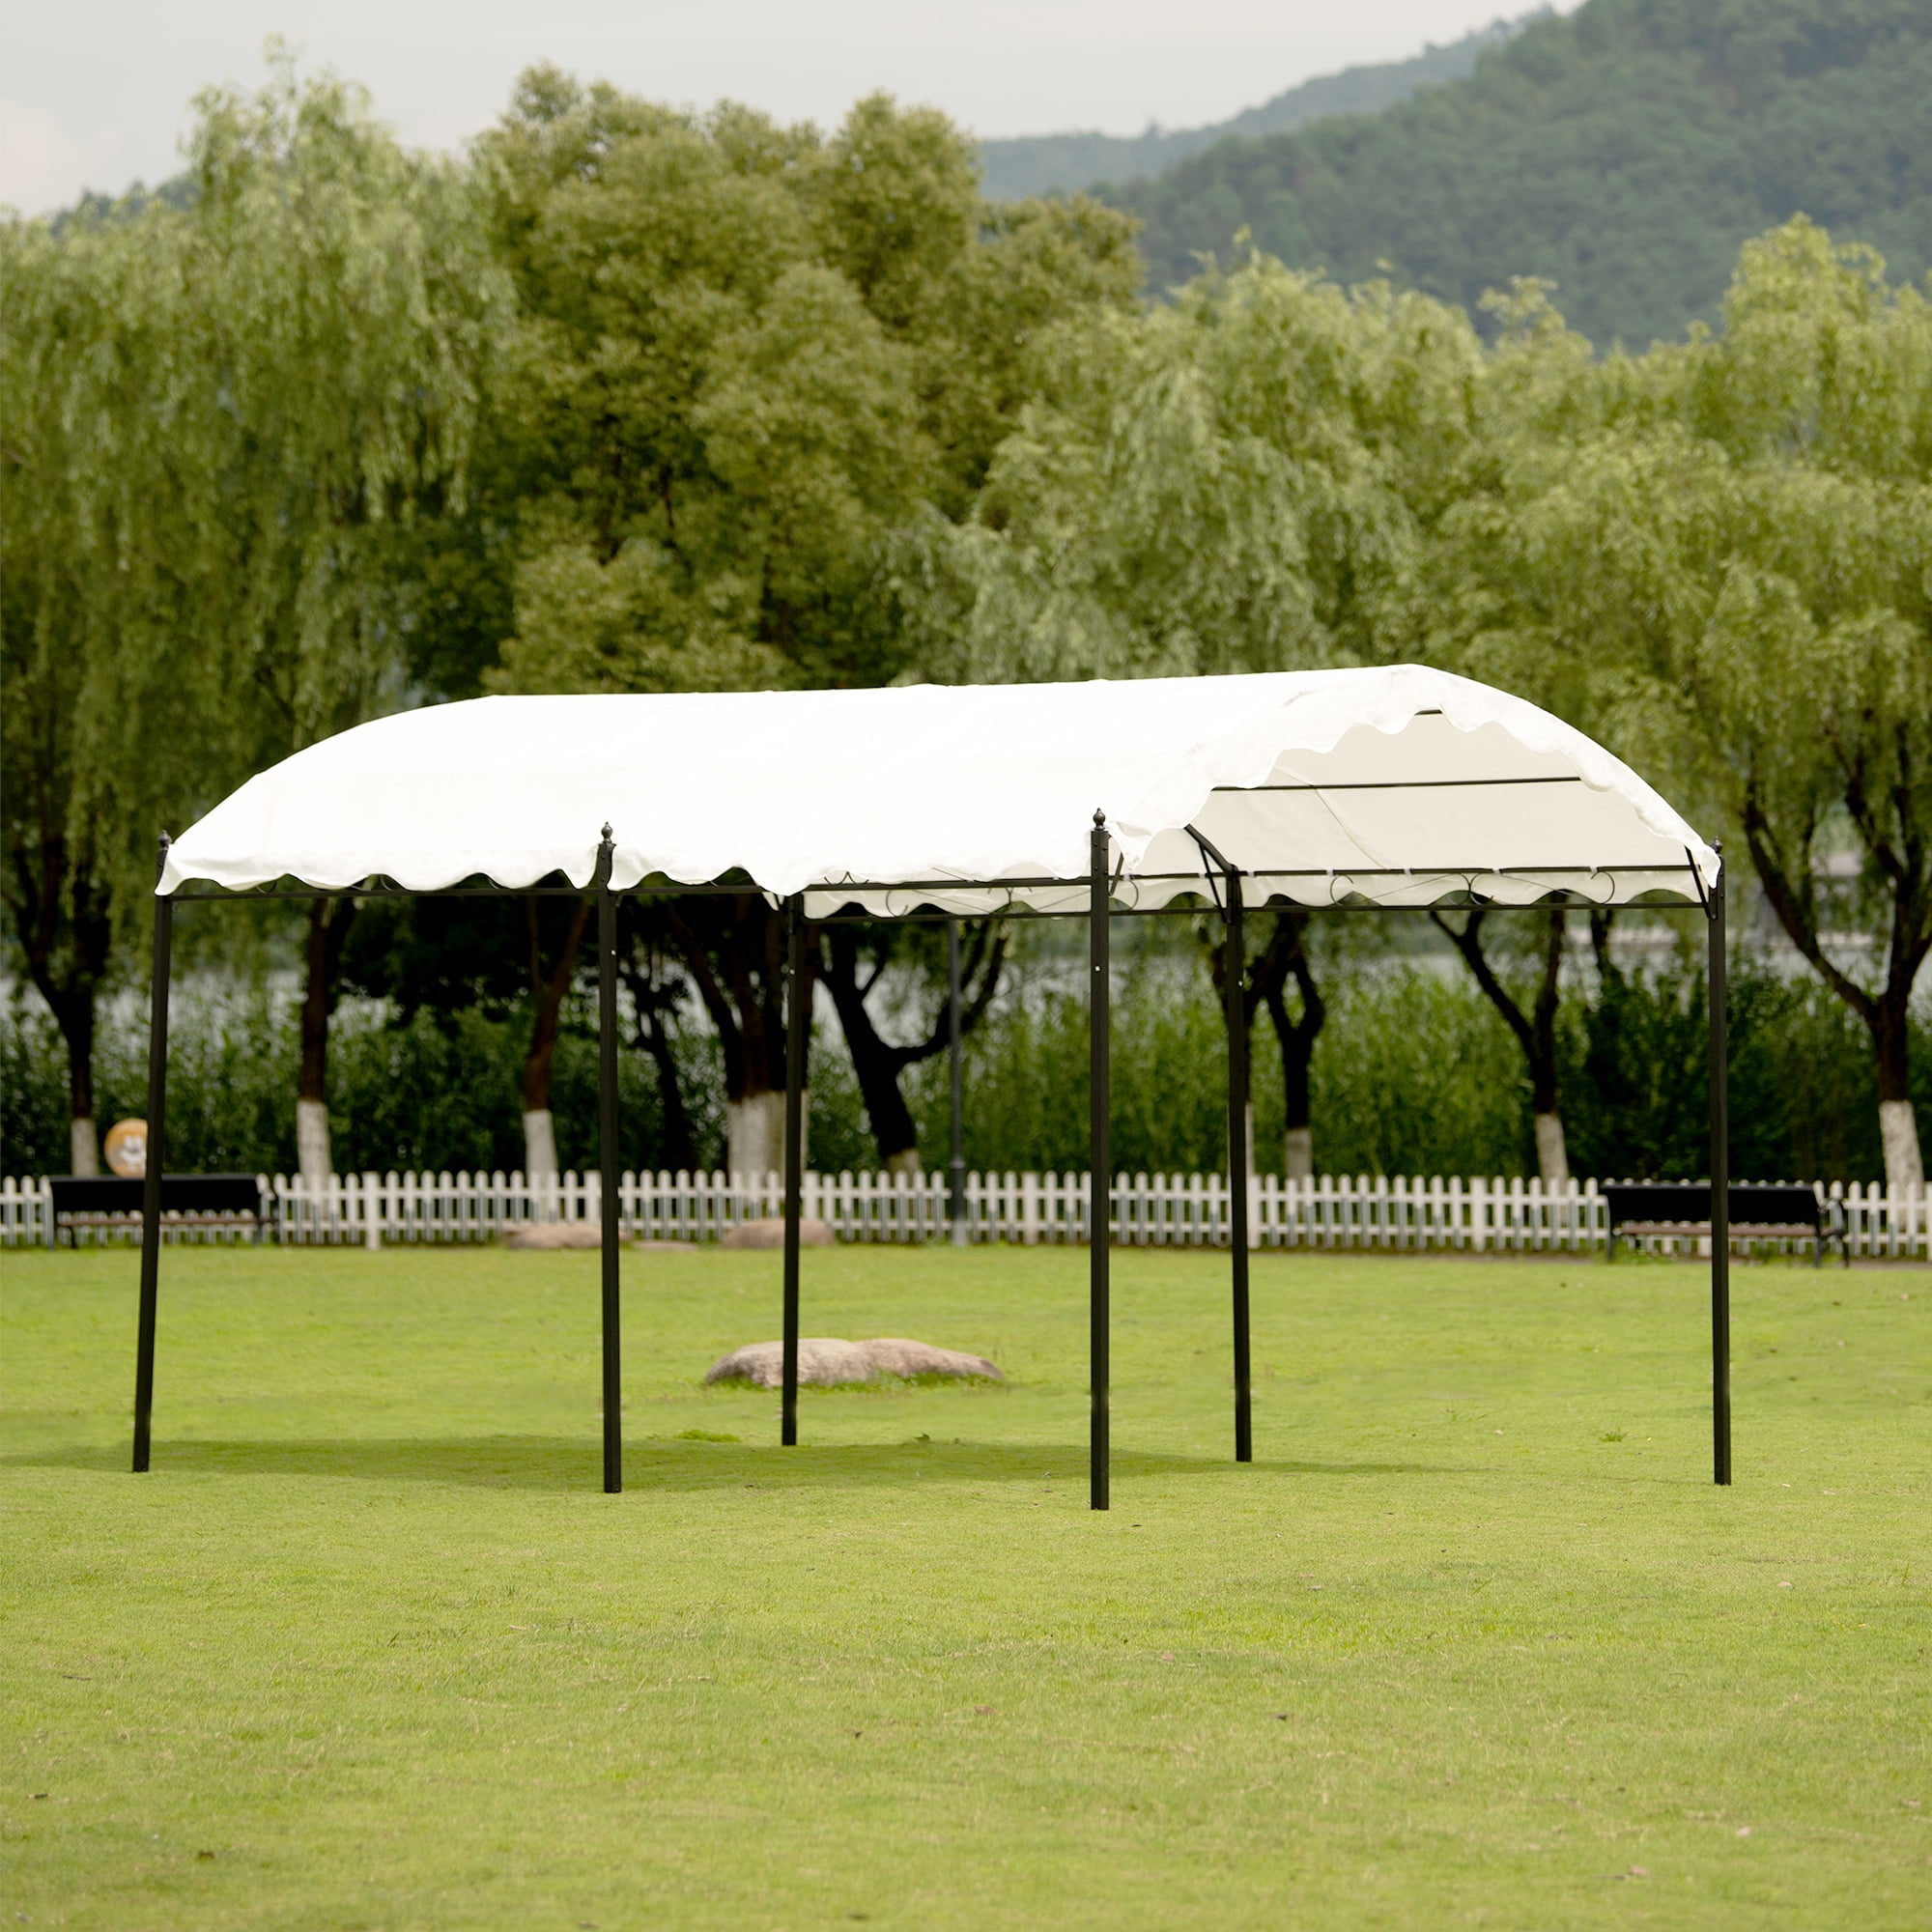 13 x 8.4 ft Heavy Duty Carport Canopy, Outdoor Portable Garage Shelter,  UV/Rain Resistant Patio Relaxing Gazebo Tent with 6 Sturdy Steel Legs and  Stakes, for Wedding, Party, Garden, Lawn, White, D1107 